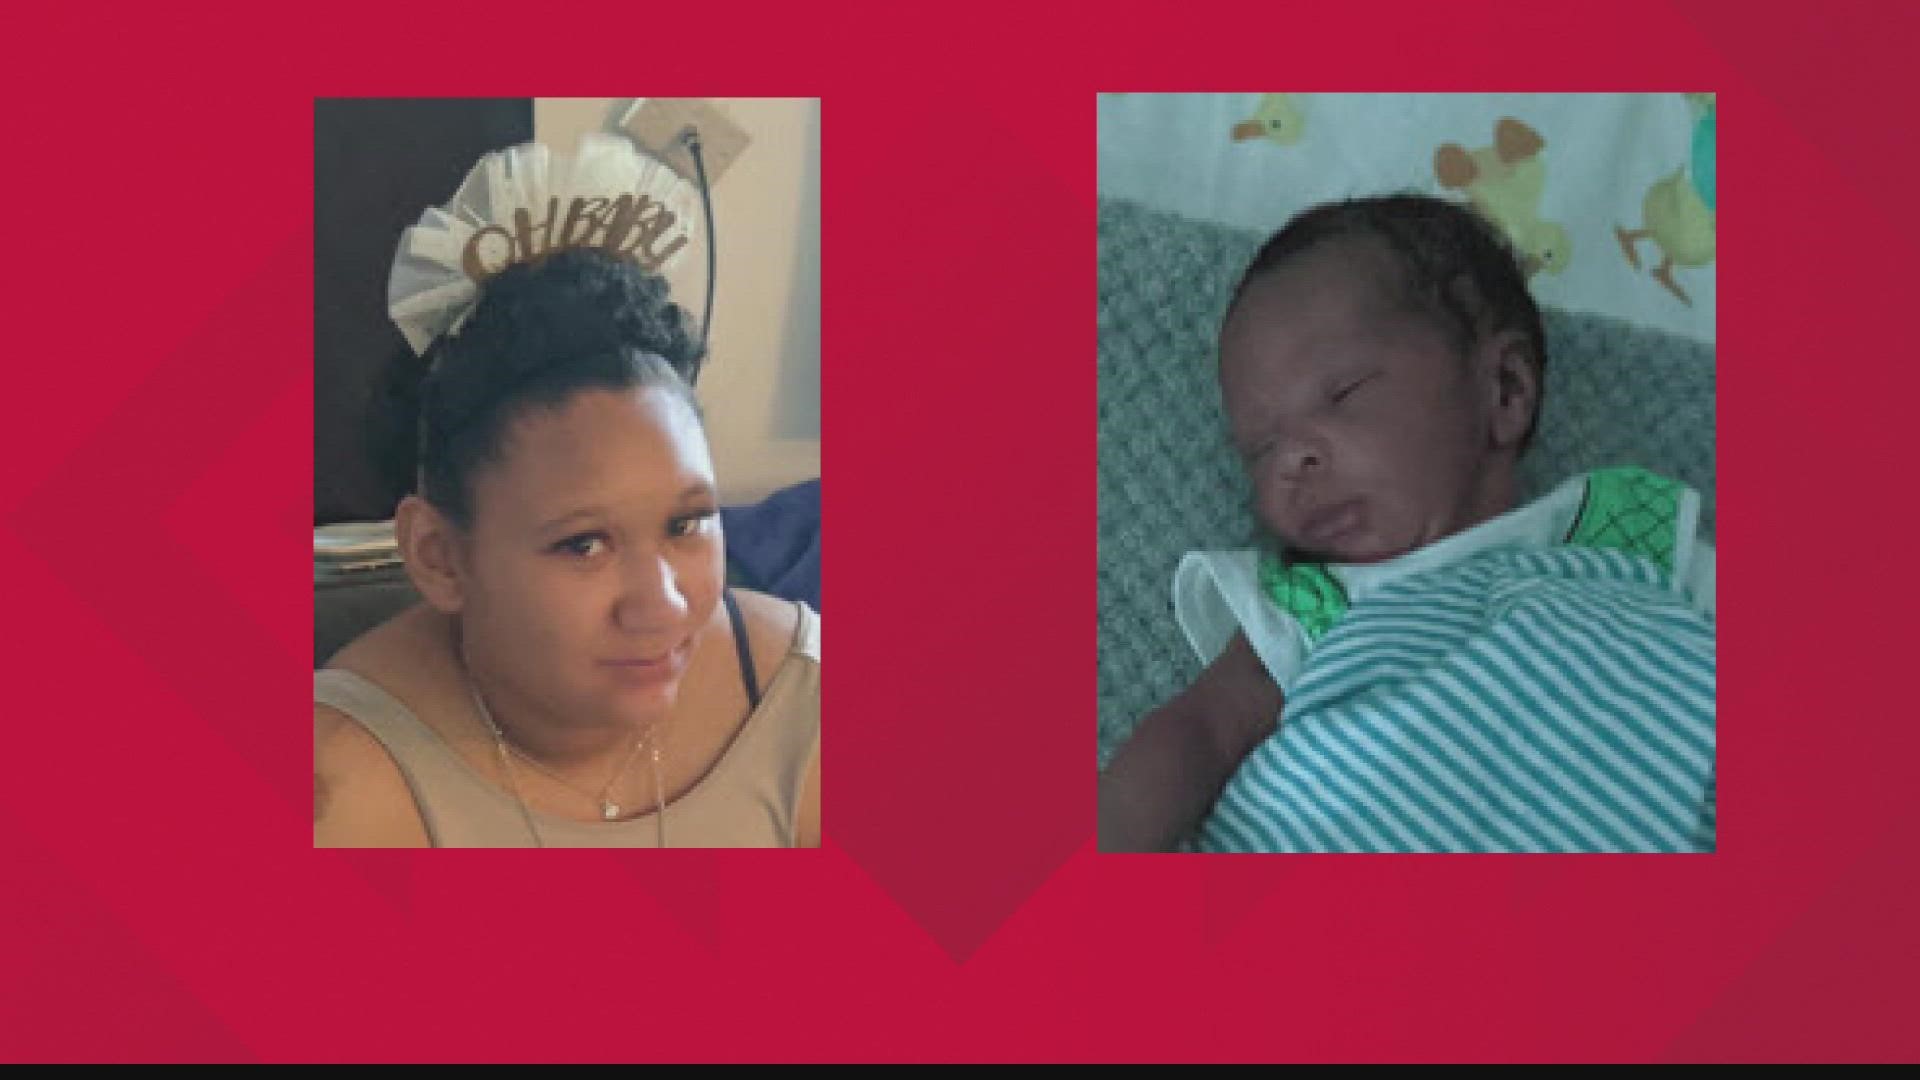 A Silver Alert has been issued in the search for a woman missing from Madison County with her infant child.